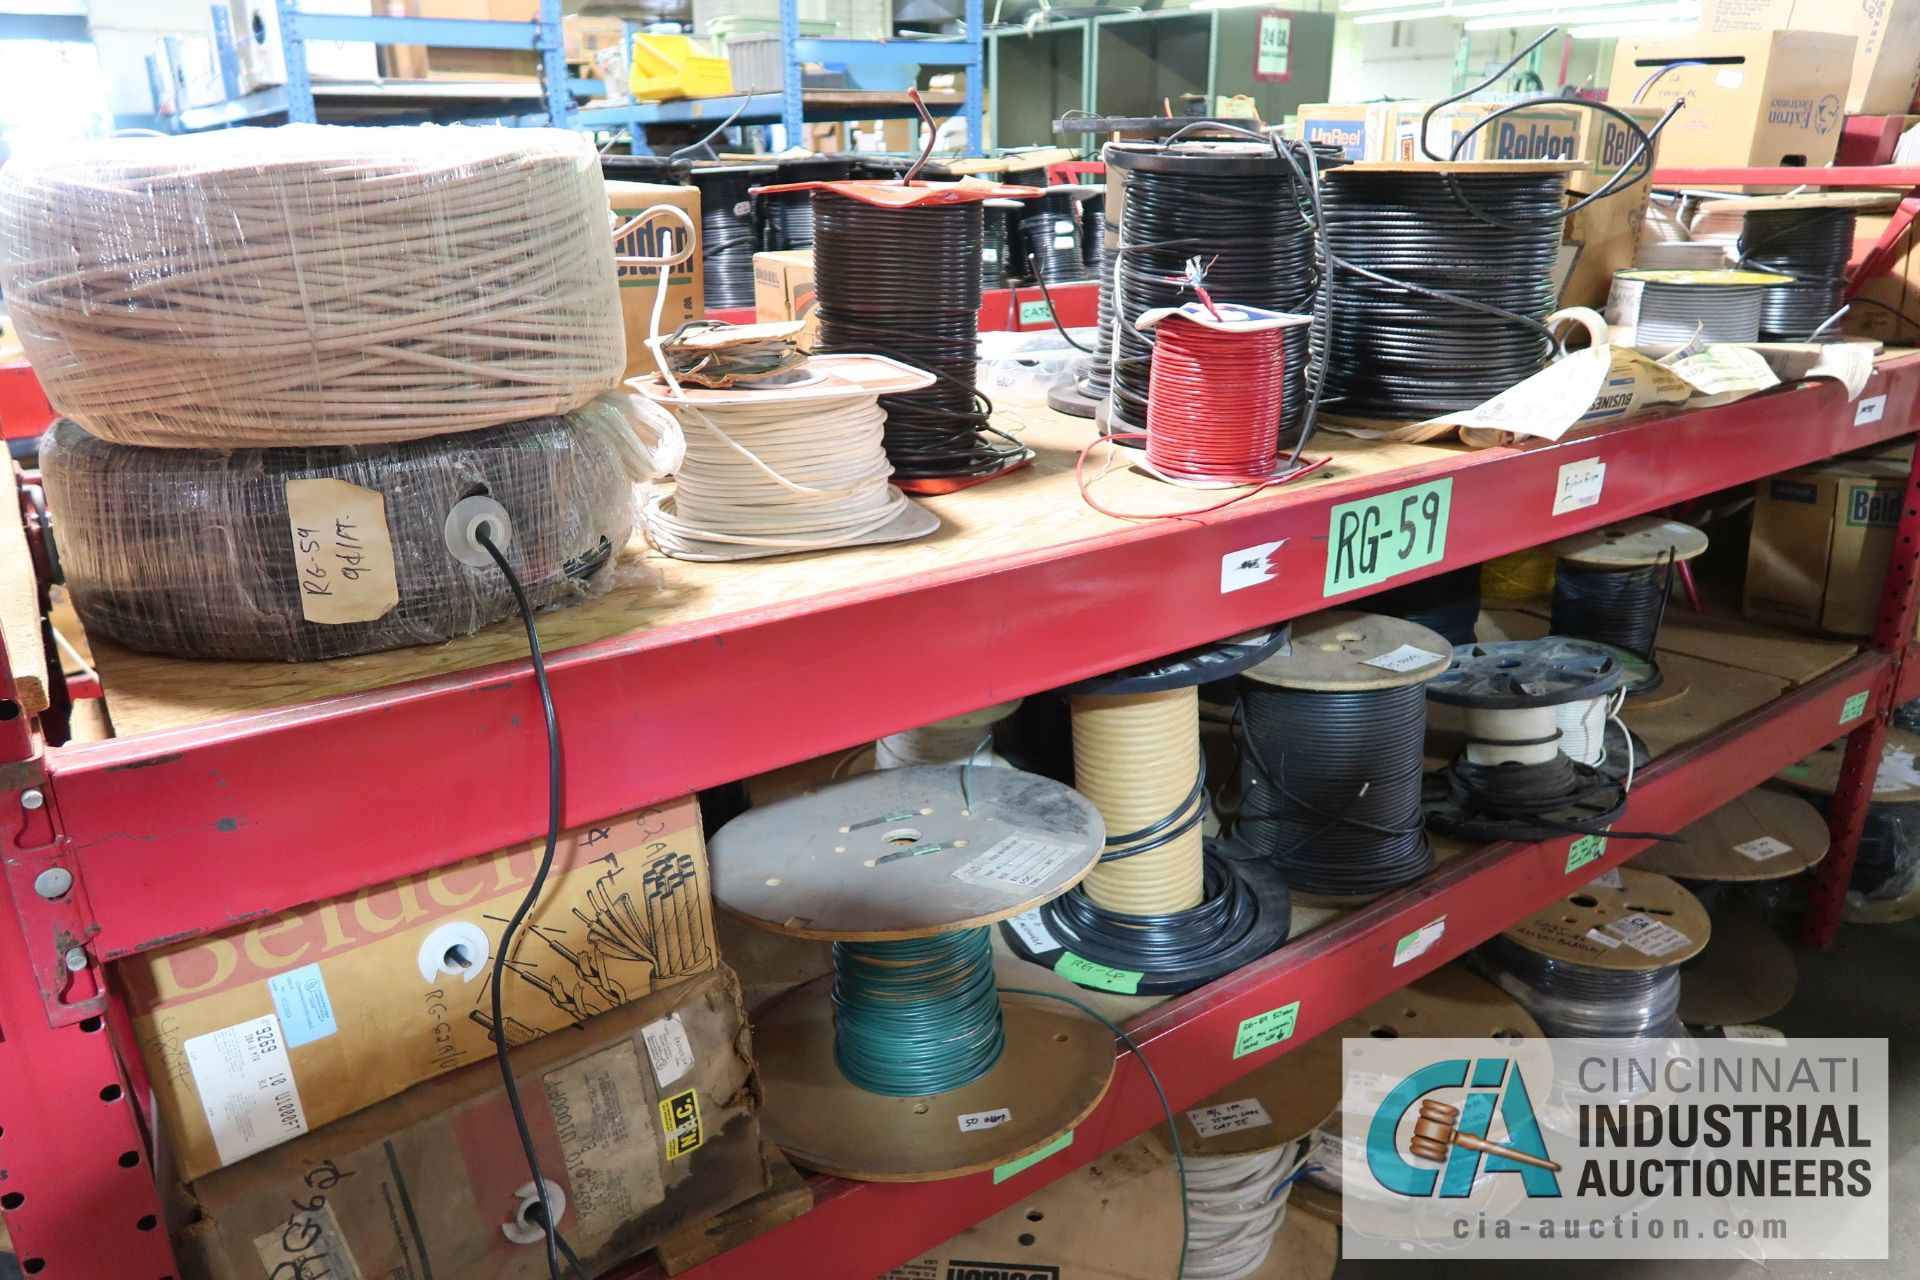 (LOT) LARGE QUANTITY OF COAX CABLE ON (3) SECTIONS RED RACK - MOSTLY BY BELDEN AND UNREEL - - Image 12 of 14